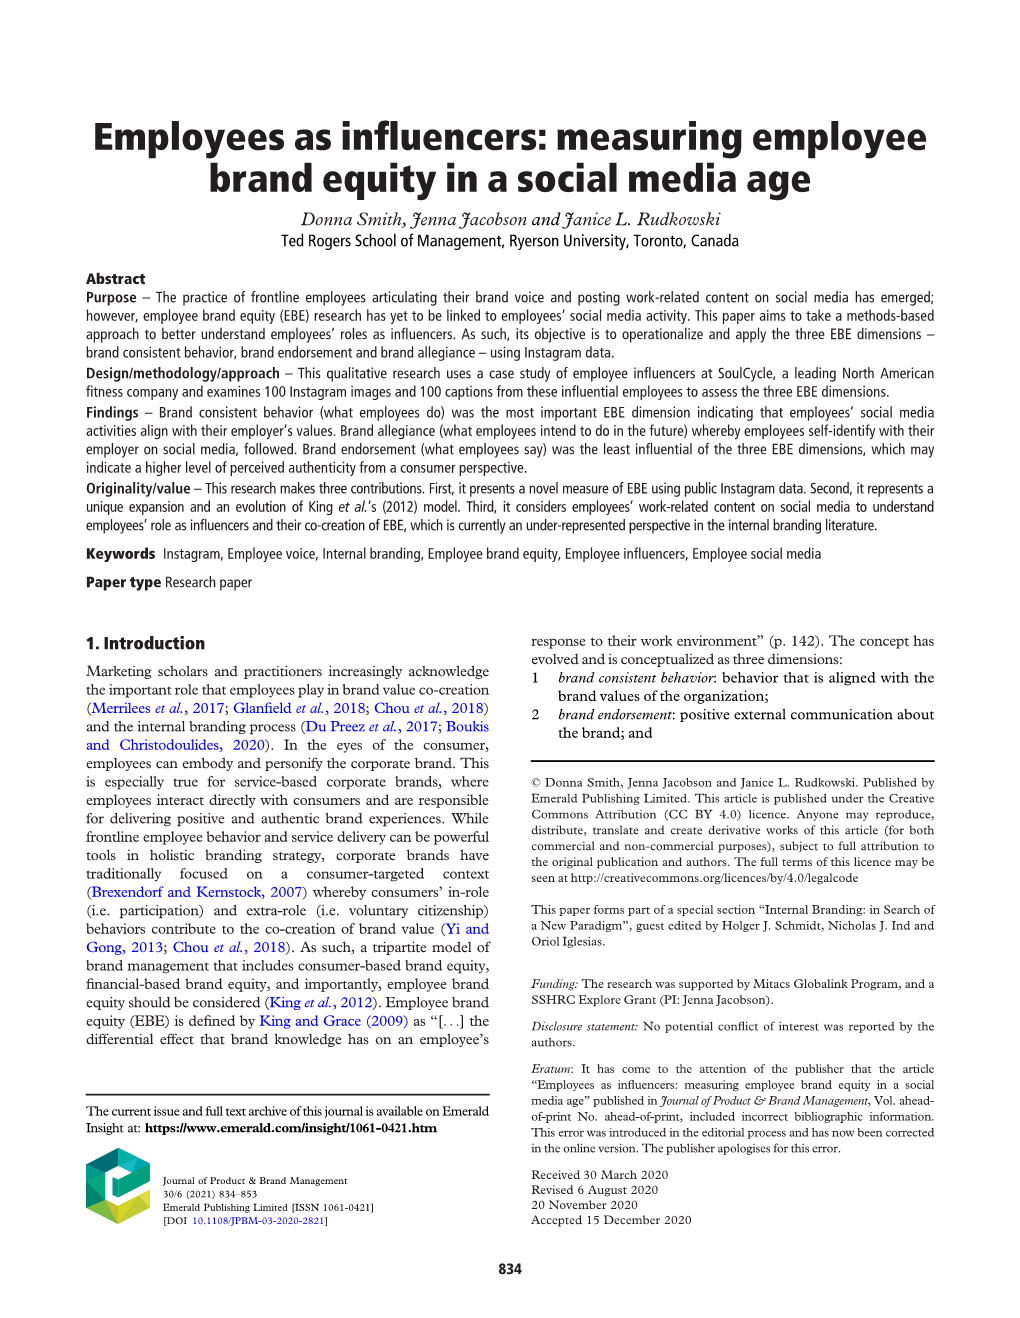 Employees As Influencers: Measuring Employee Brand Equity in a Social Media